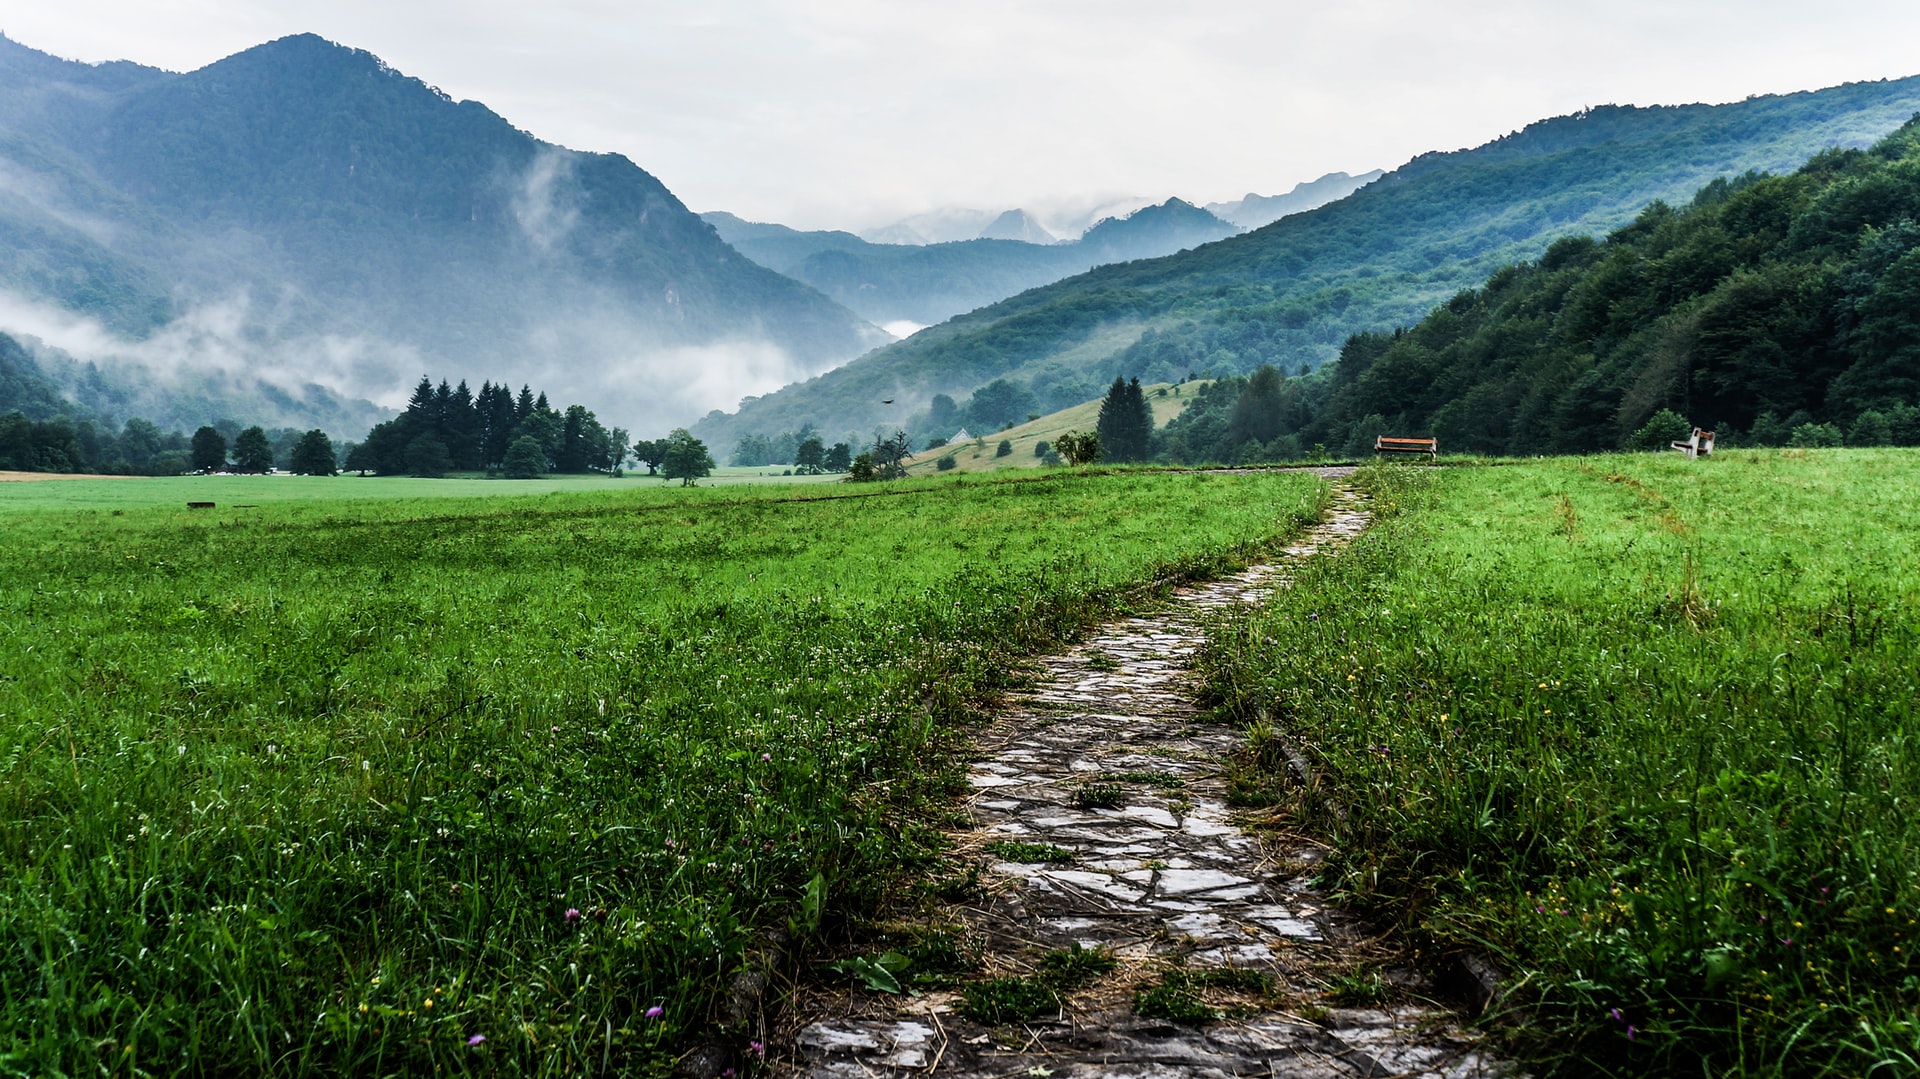 Cobbled path leading through a field into misty mountains